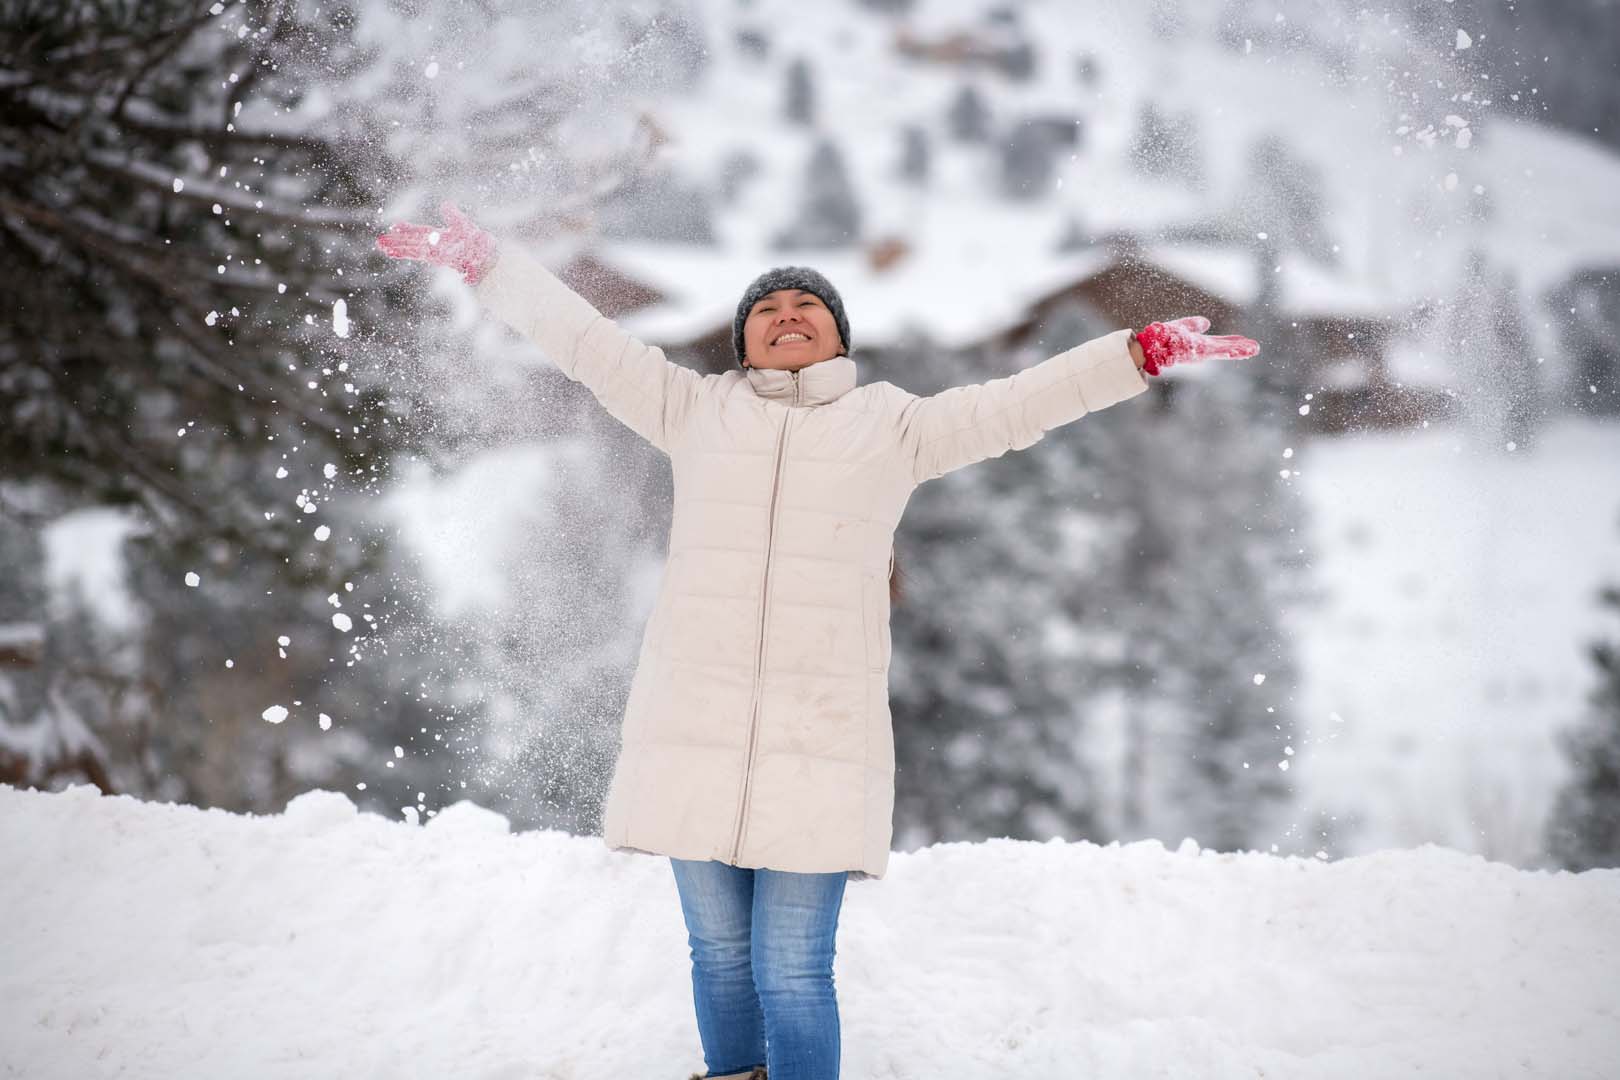 Woman throwing snow into the air with trees behind her